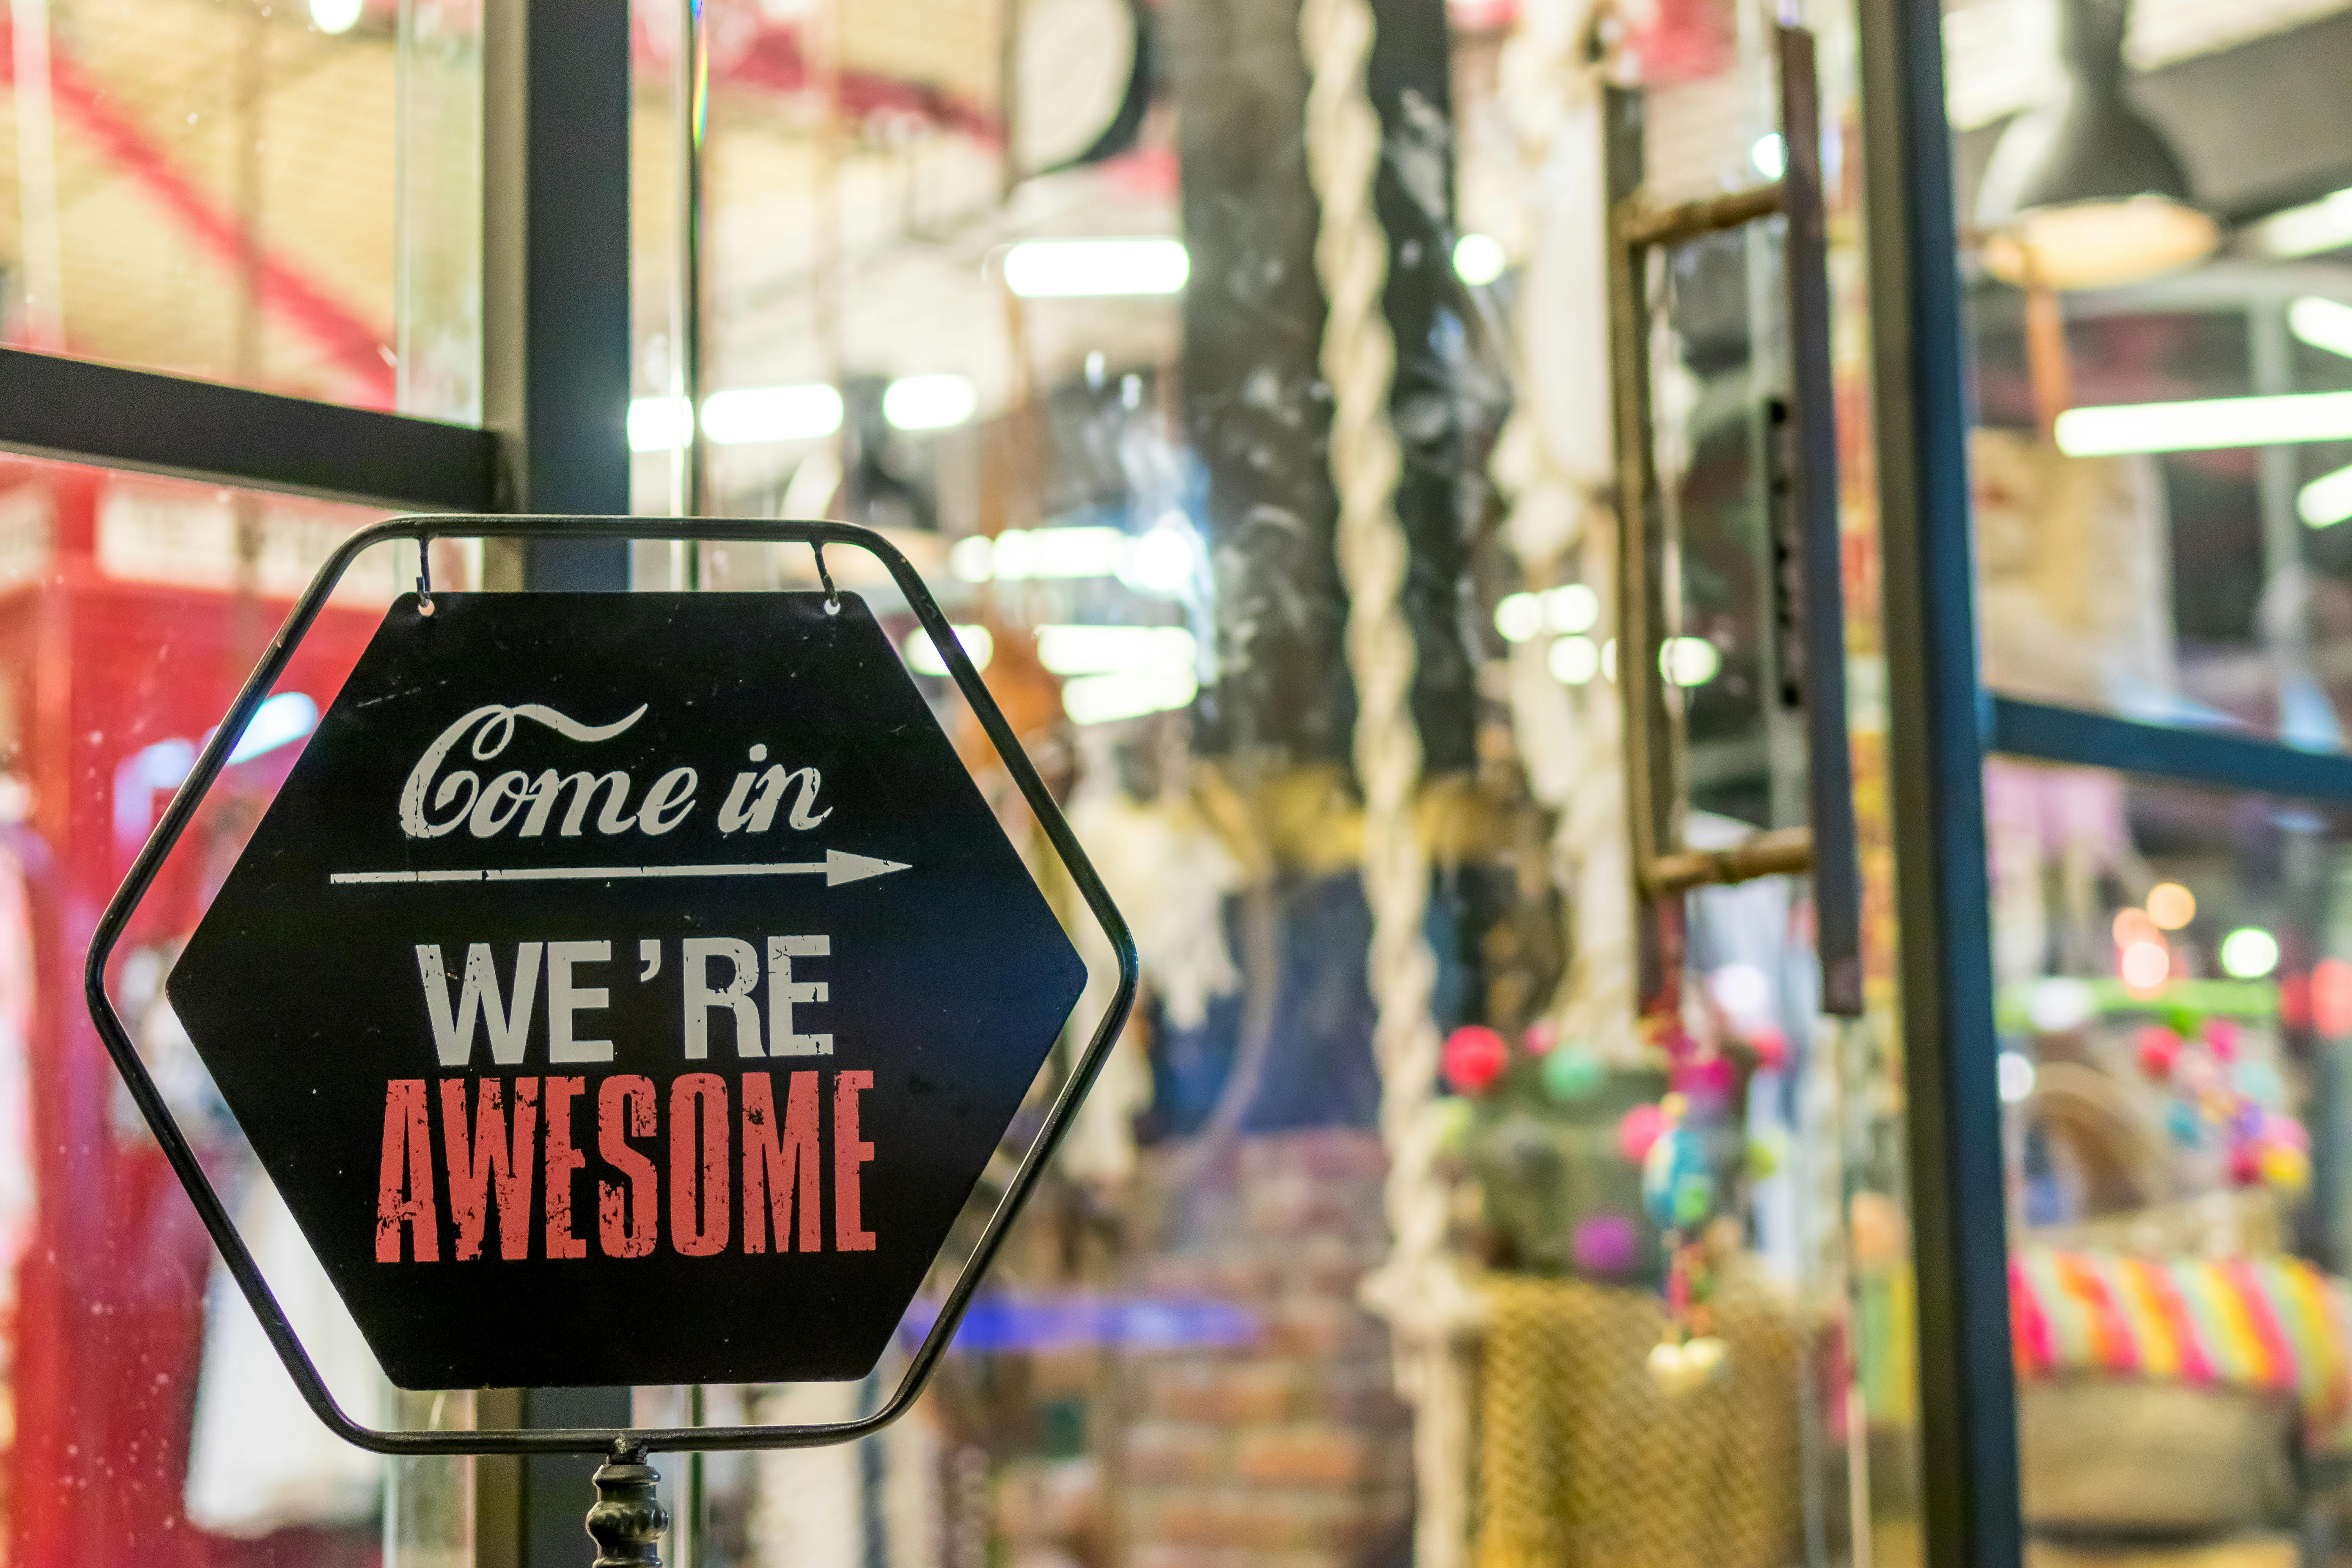 "Come in we're awesome" sign at department store. | Photo: Pexels